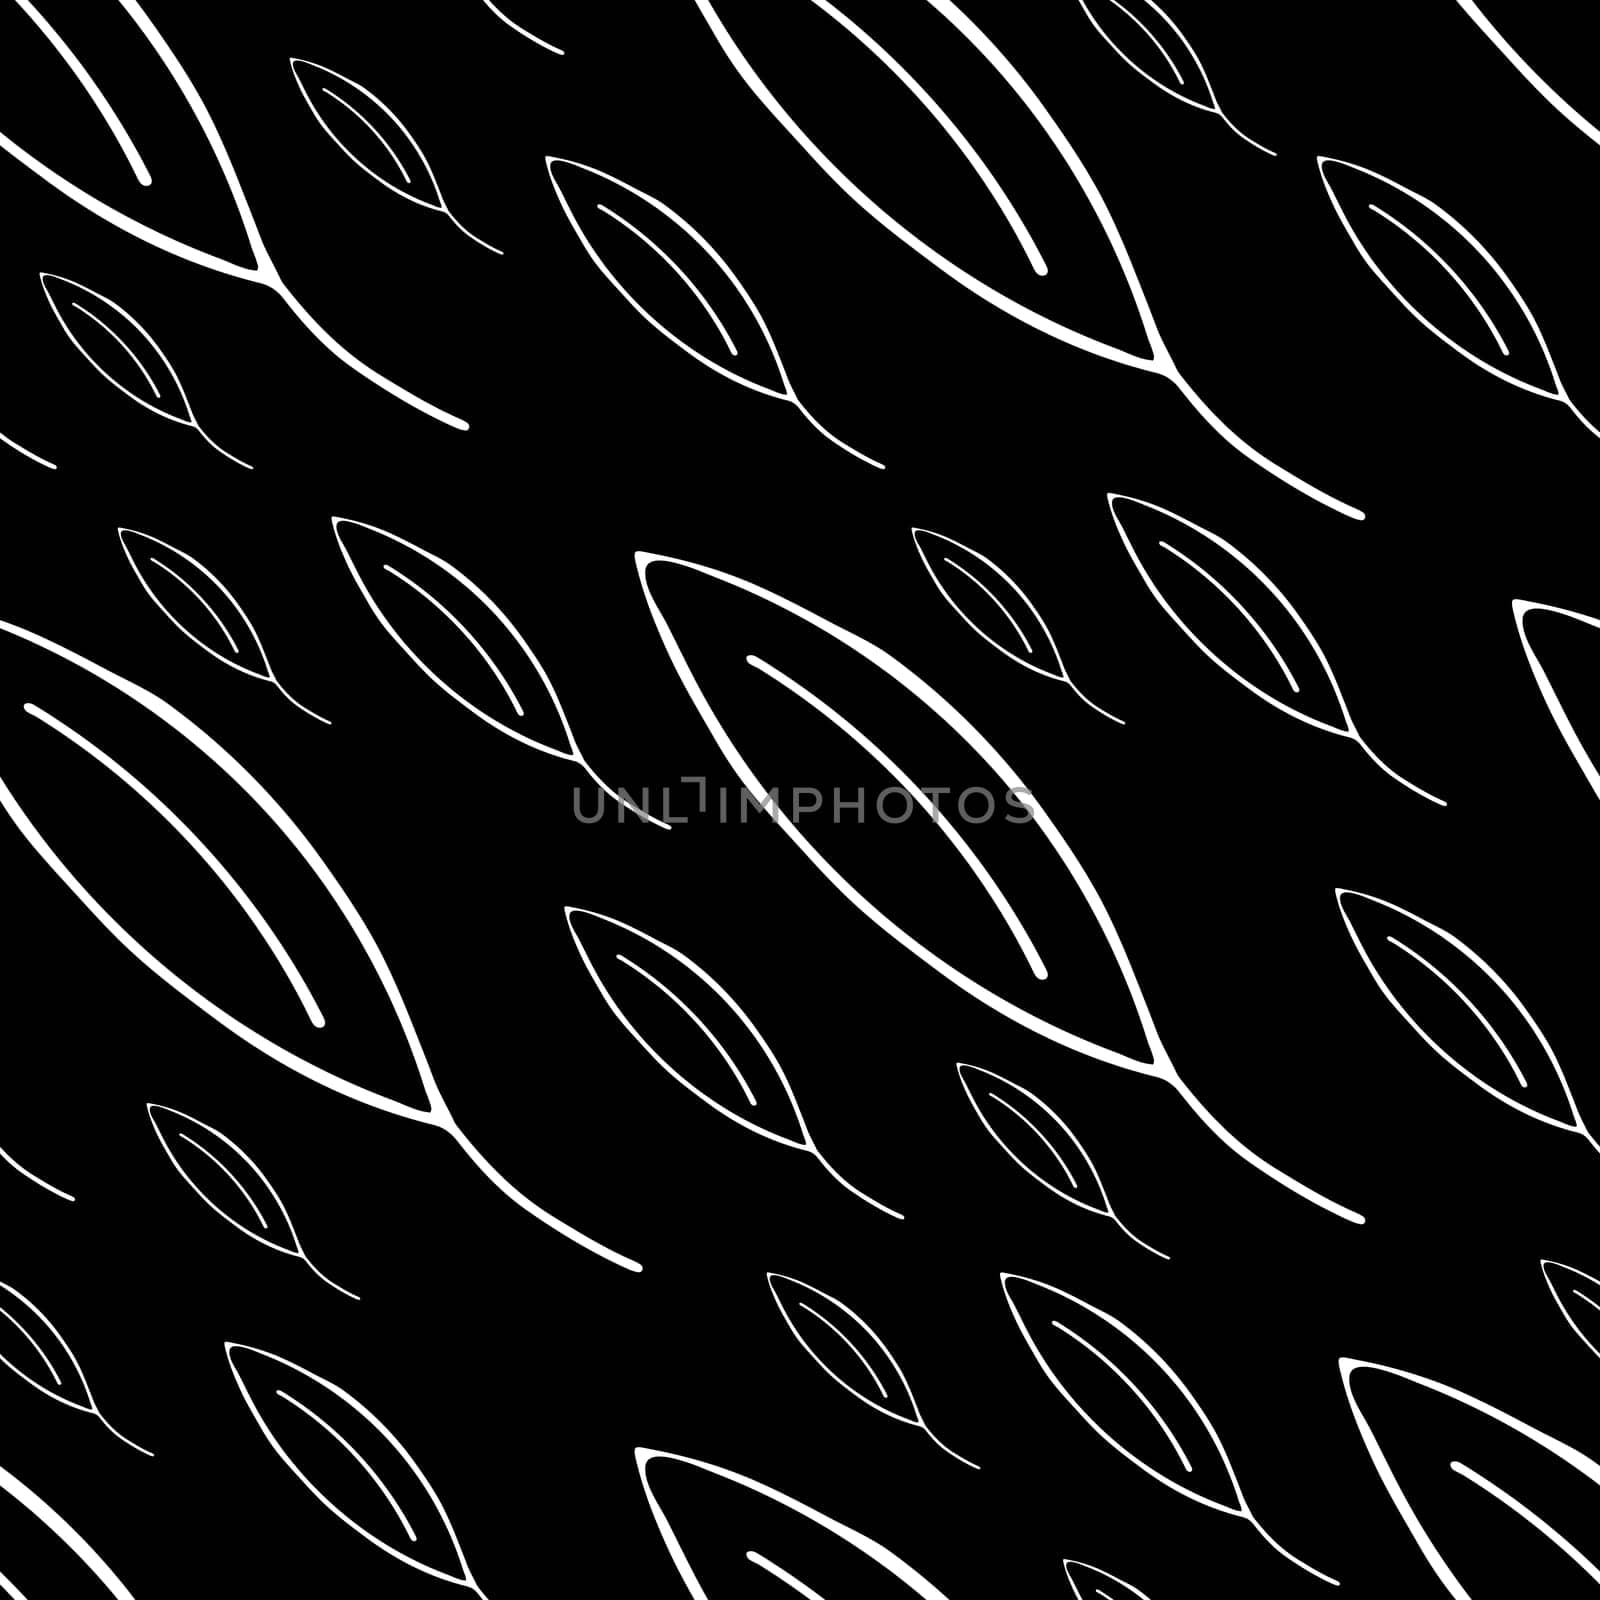 Seamless Pattern with Hand Drawn Black and White Leaves. by Rina_Dozornaya